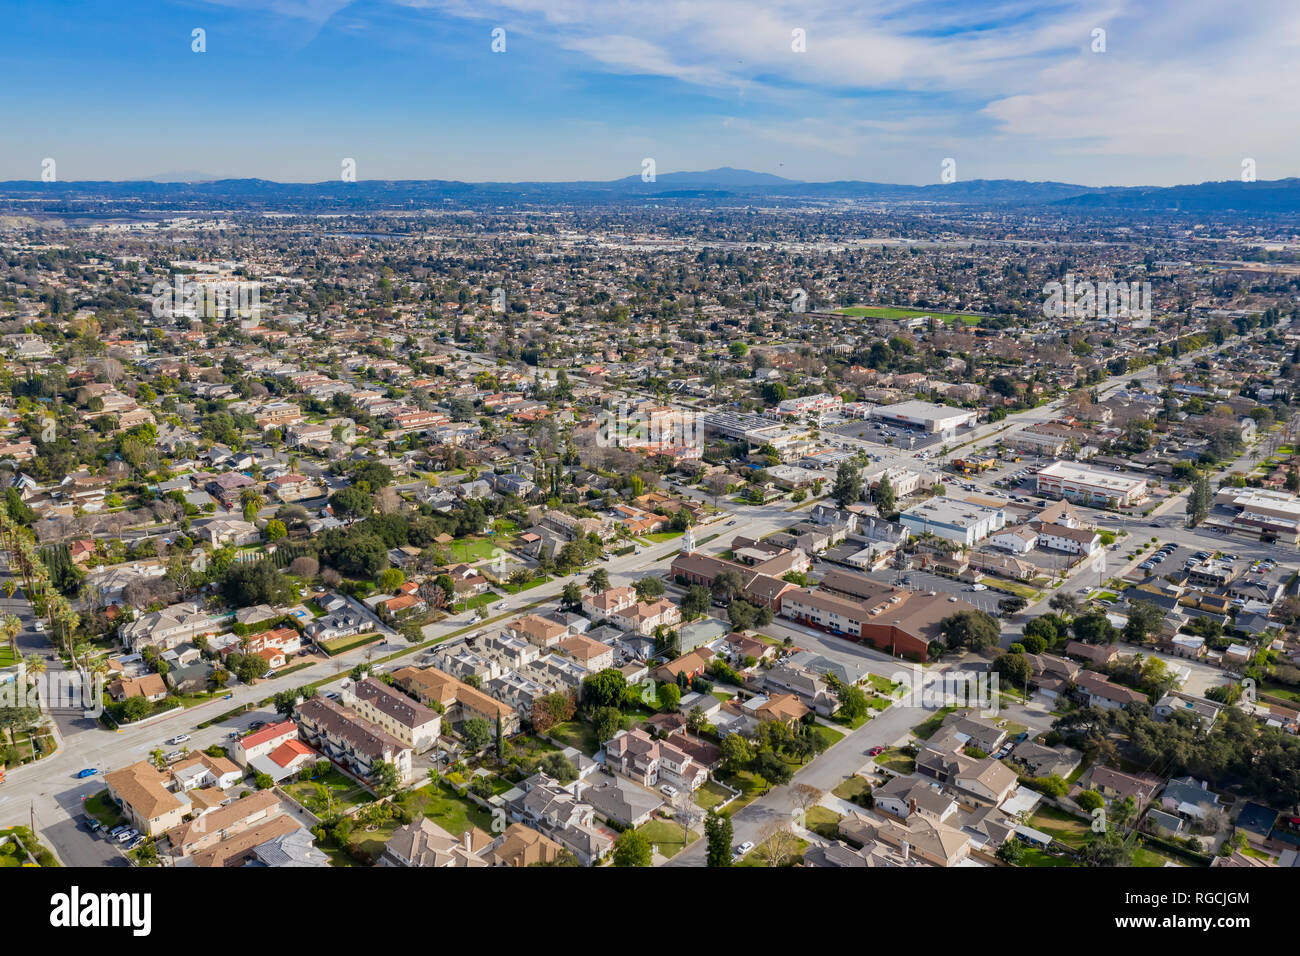 Aerial view of the Temple City, Arcadia area at Los Angeles County, California Stock Photo